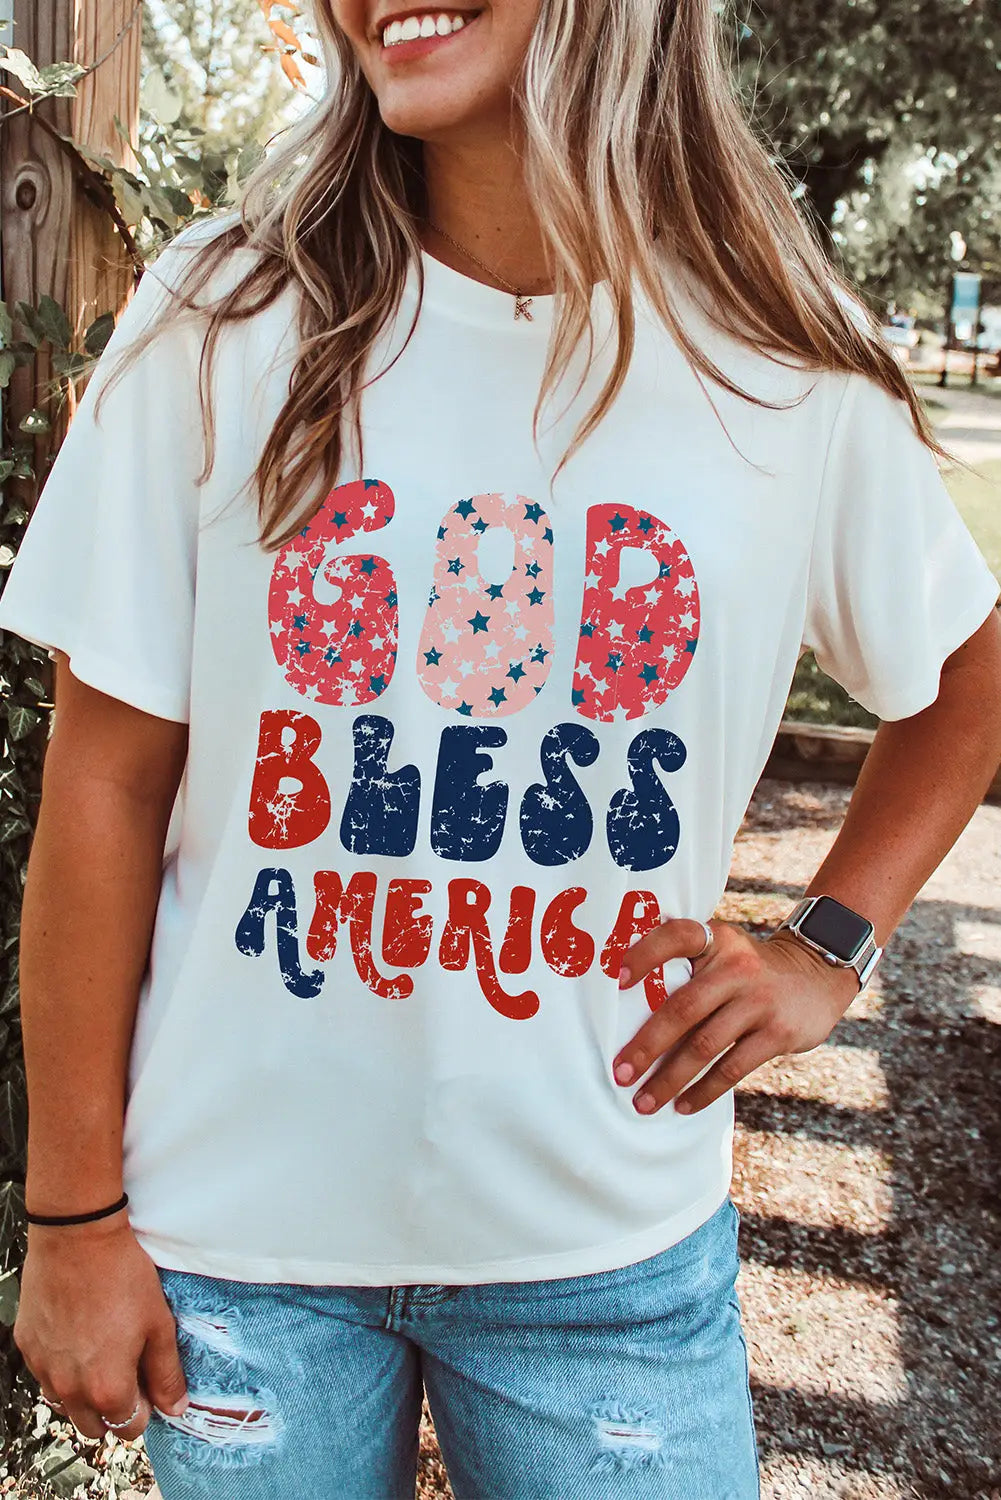 White god bless america graphic tee - s / 62% polyester + 32% cotton + 6% elastane - t-shirts